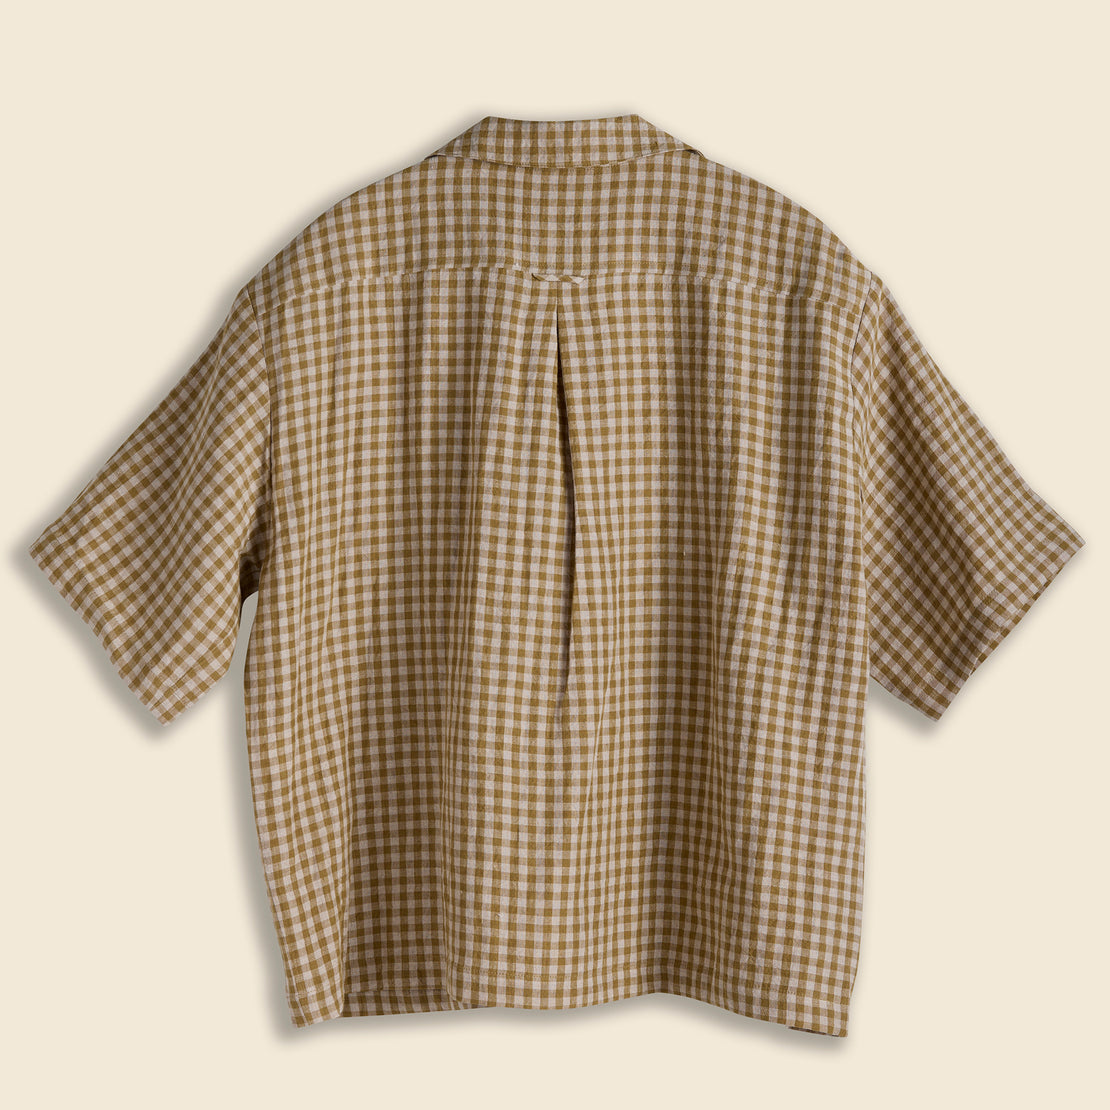 Notched Collar Gingham Shirt - Mustard - Amente - STAG Provisions - W - Tops - S/S Woven